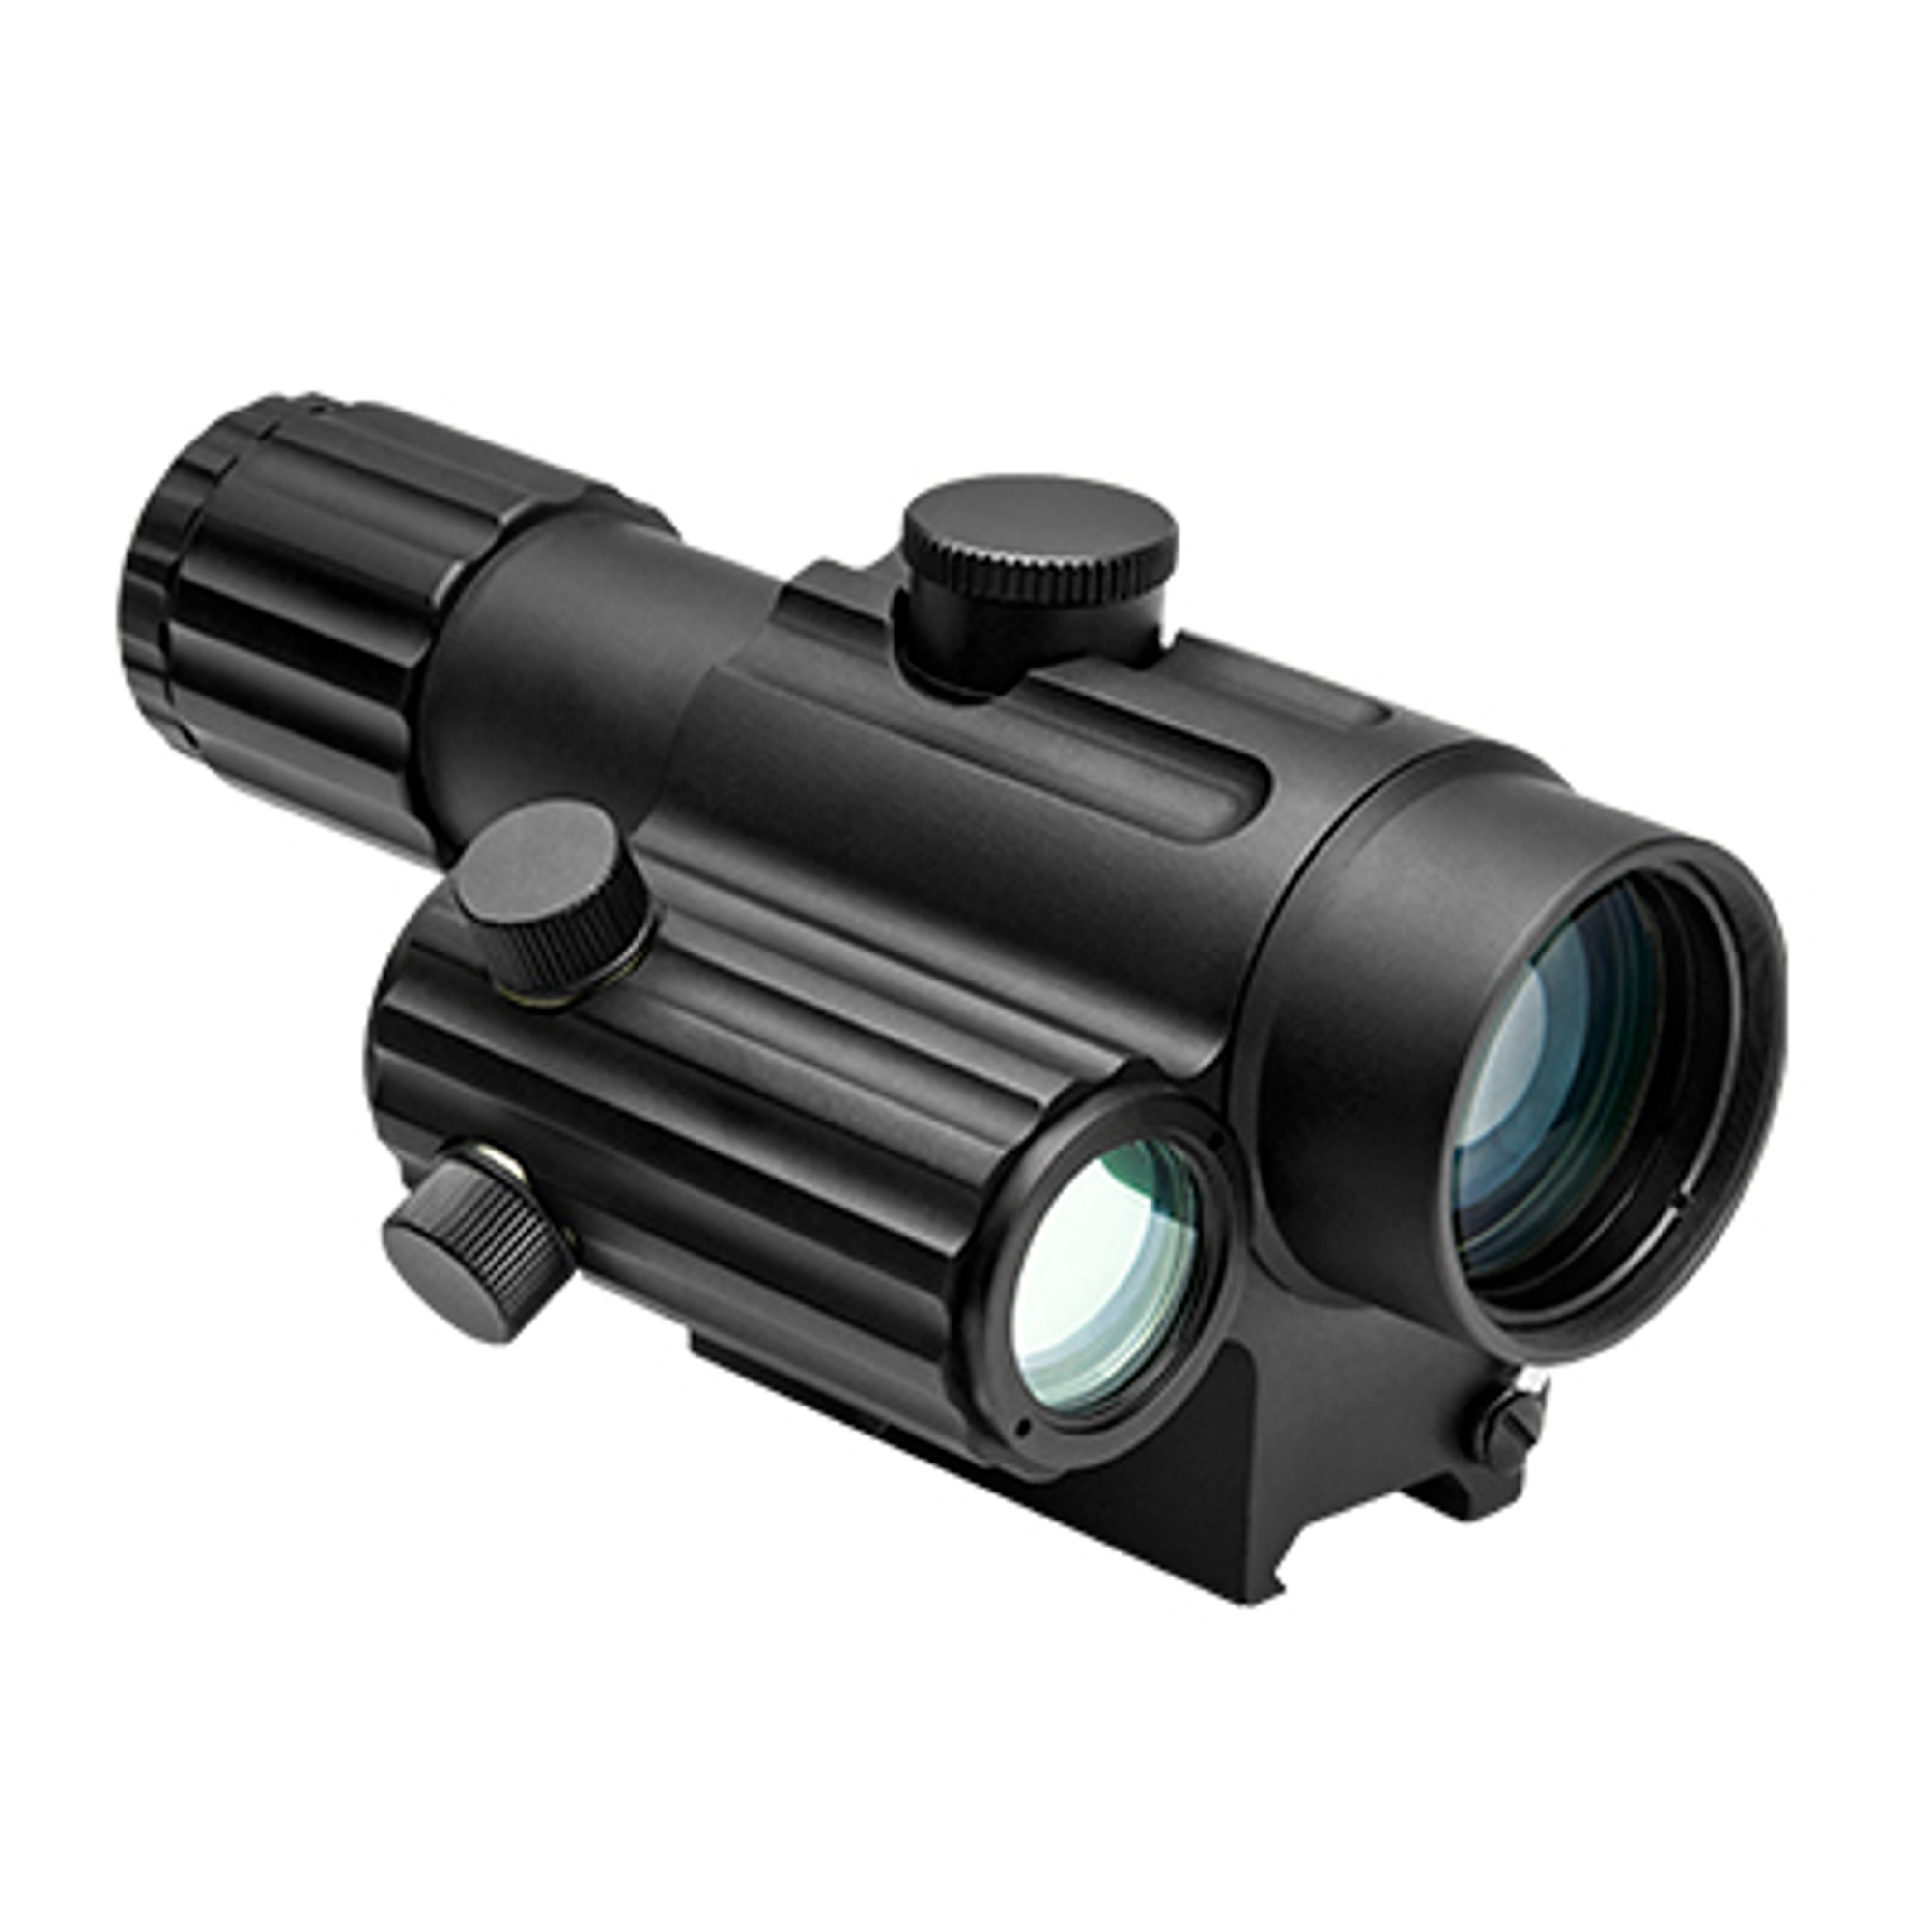 VISM DUO Scope - 4X34mm w/Offset Green Dot - Right Hand